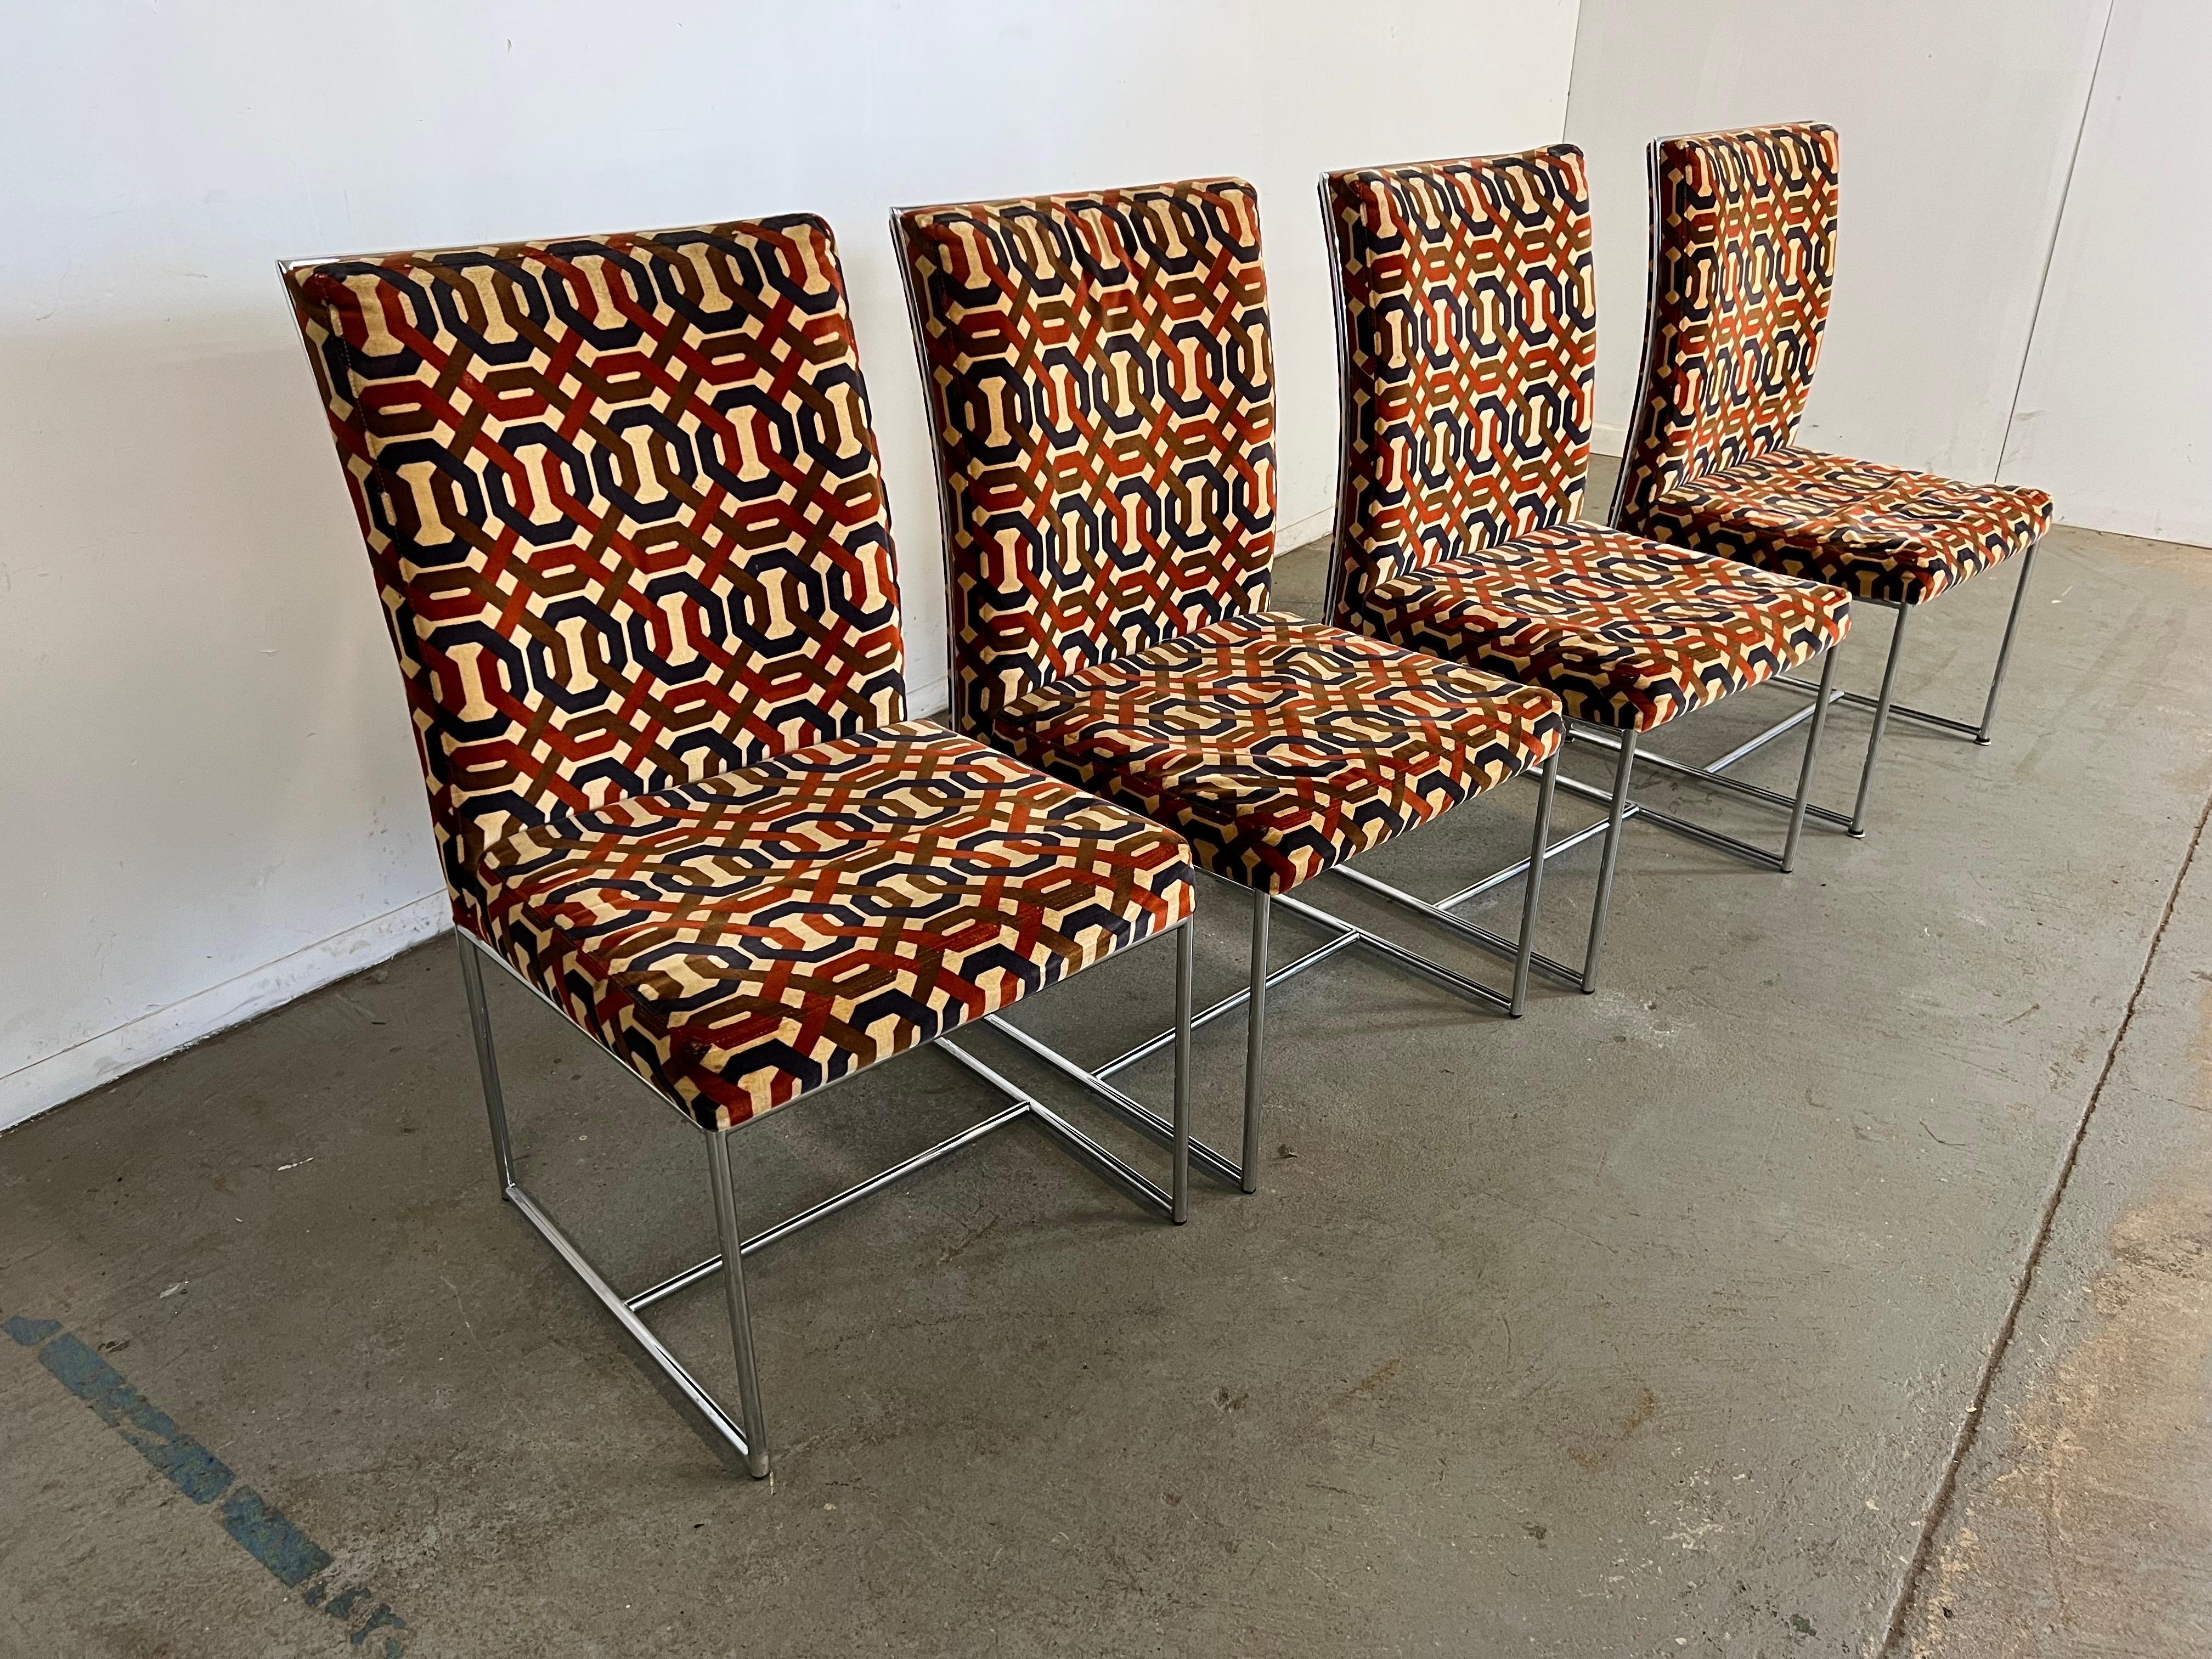 Offered is a vintage set of 4 Mid-Century Modern dining chairs by Milo Baughman for Thayer Coggin. These beautiful chairs have chrome framed bases and original Velvet geometric upholstery. The Chrome is tublular. These chairs make a statement and